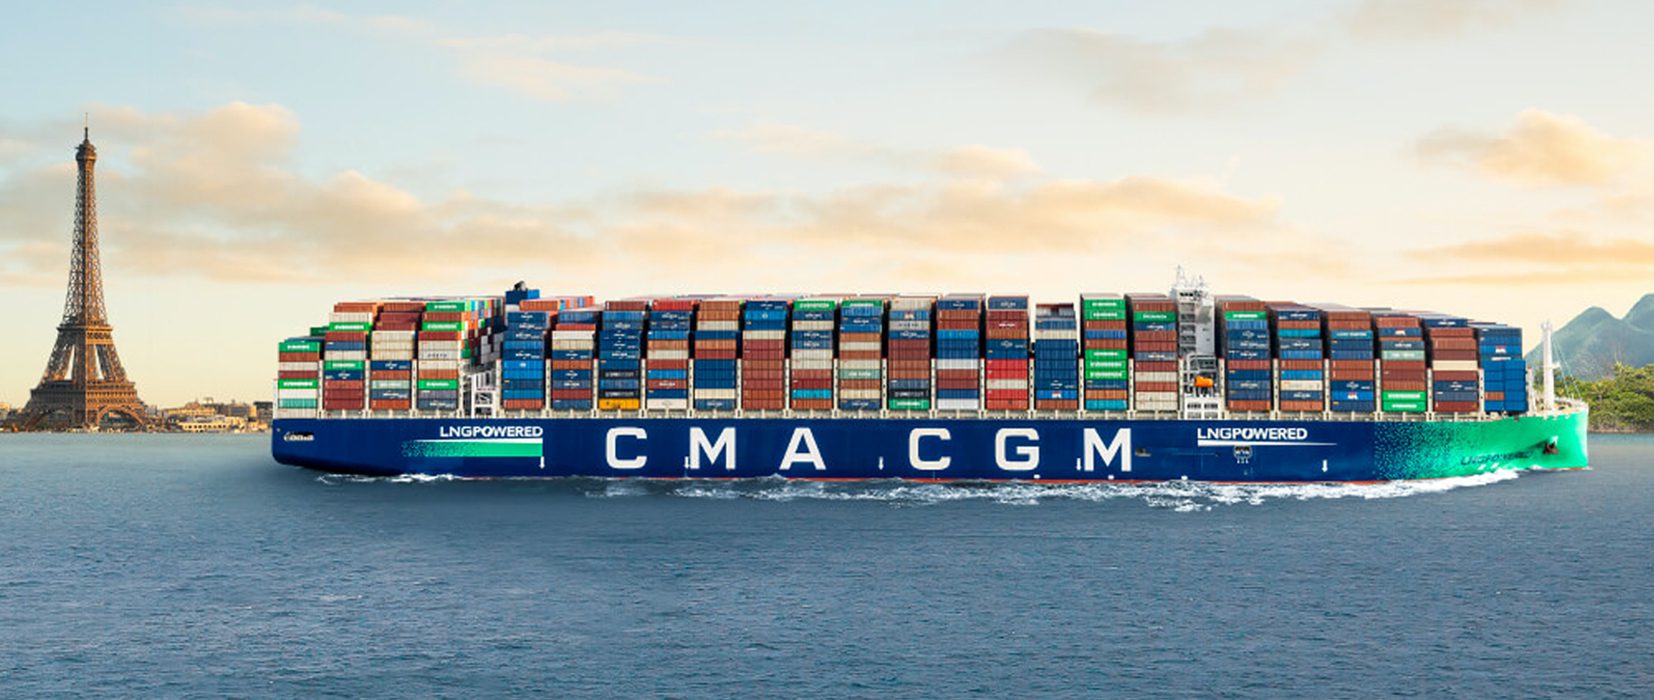 CMA CGM Says Biogas-Powered Ships Will Reduce Emissions by 67%